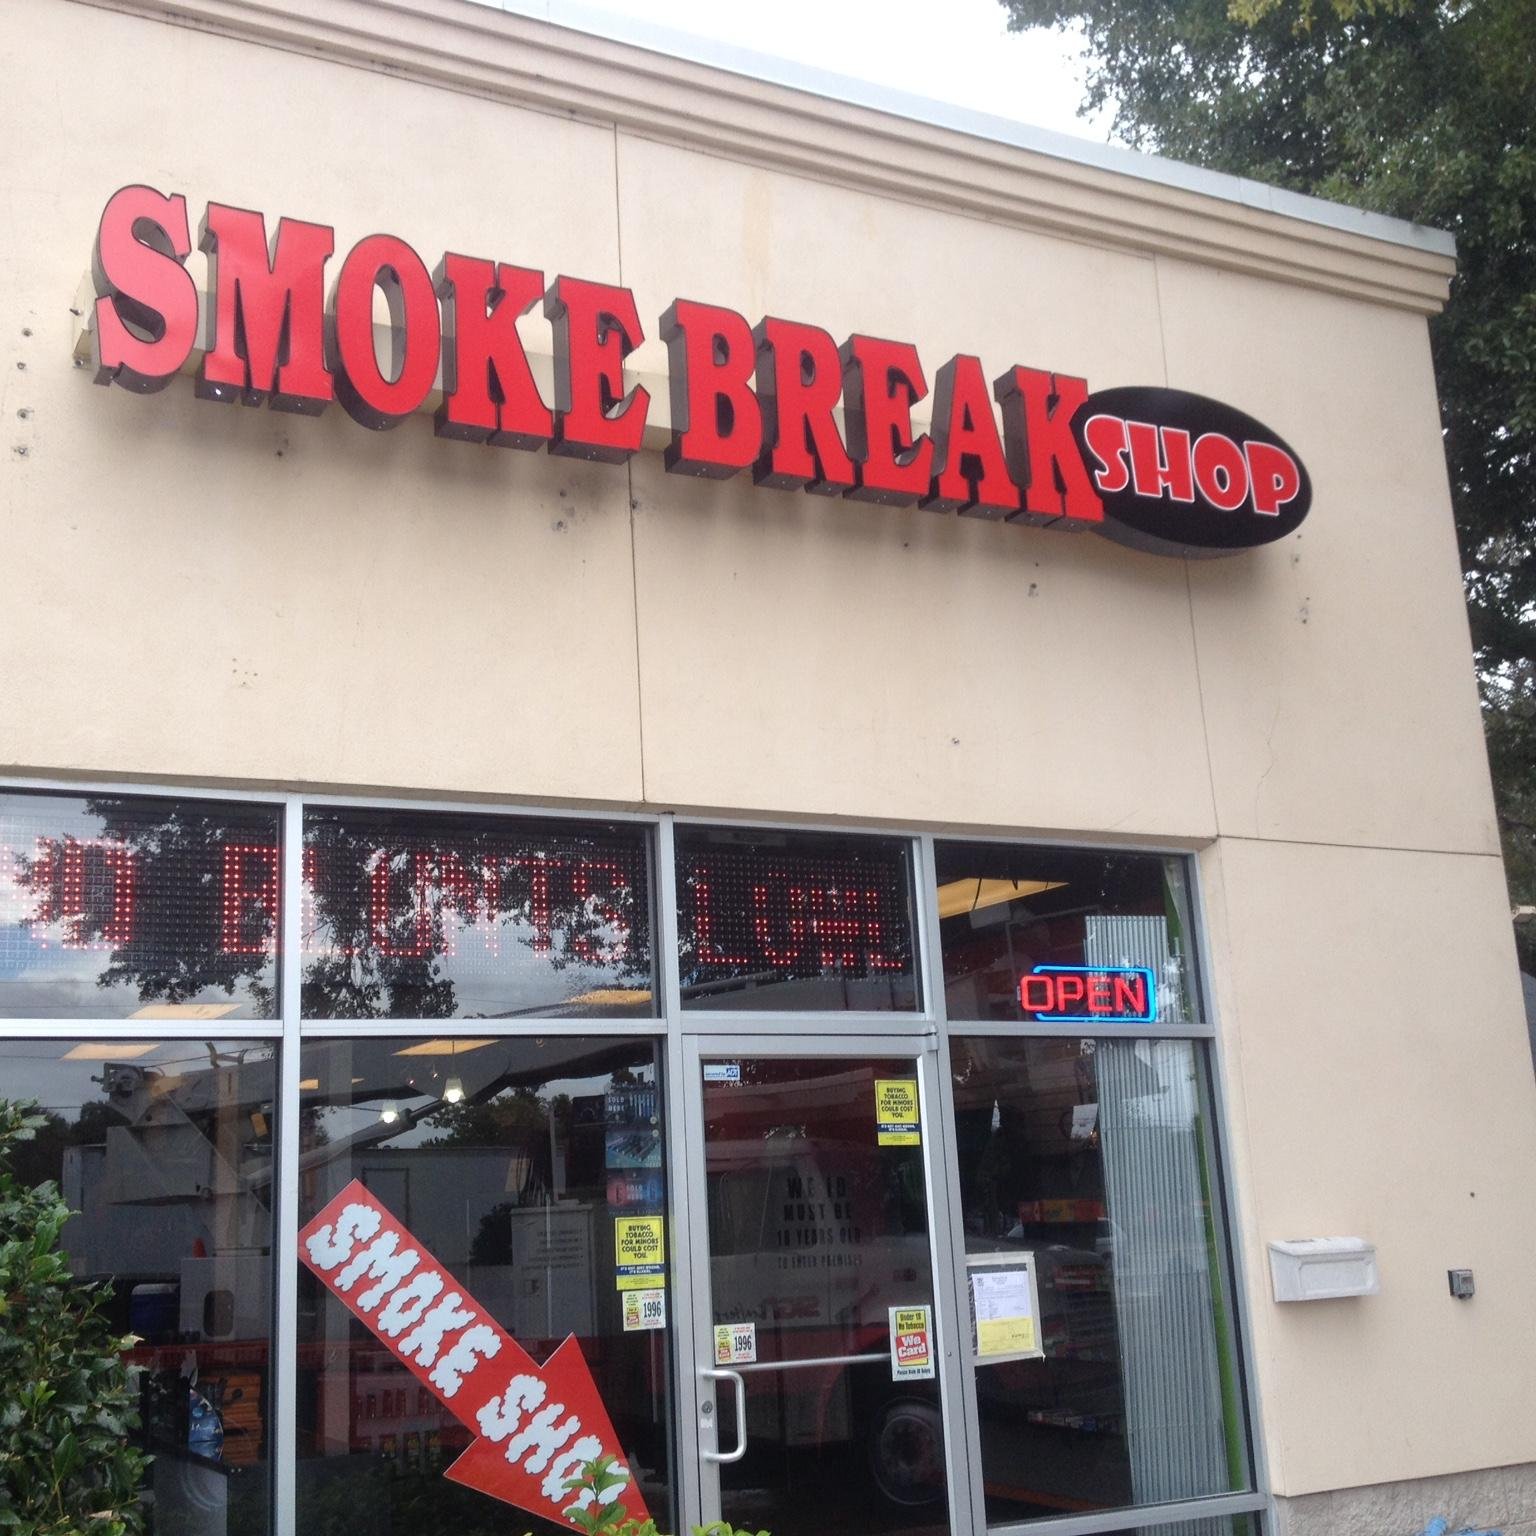 Two East Orlando locations. 7501 E. Colonial & 15265 E. Colonial. Best prices & service in Central Florida!